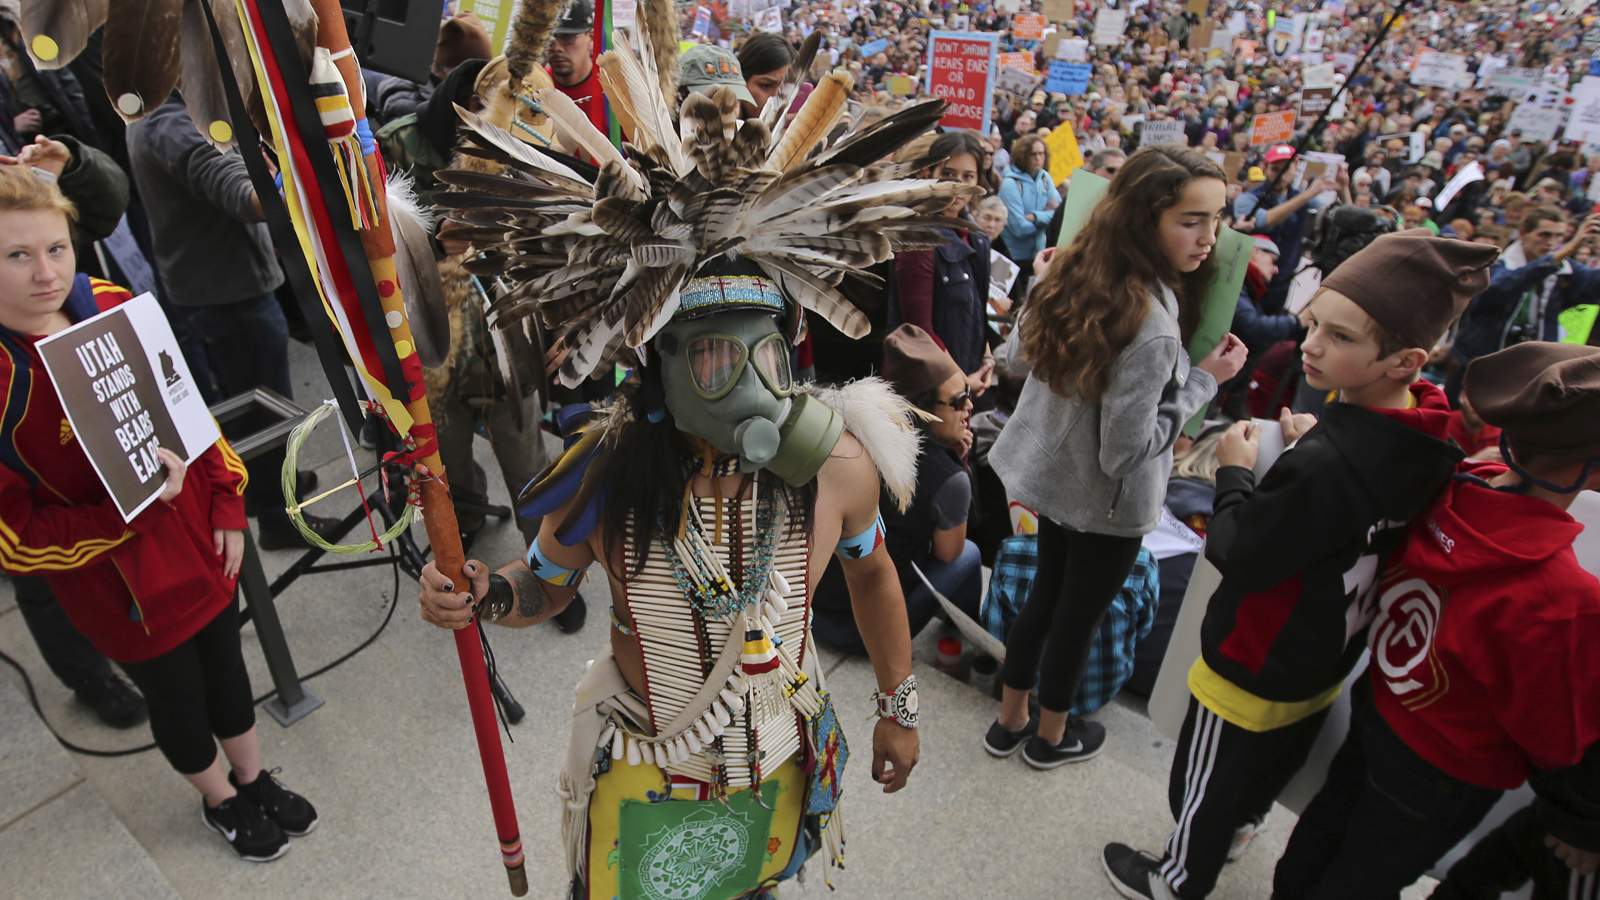 Why Native Americans struggle to protect their sacred places